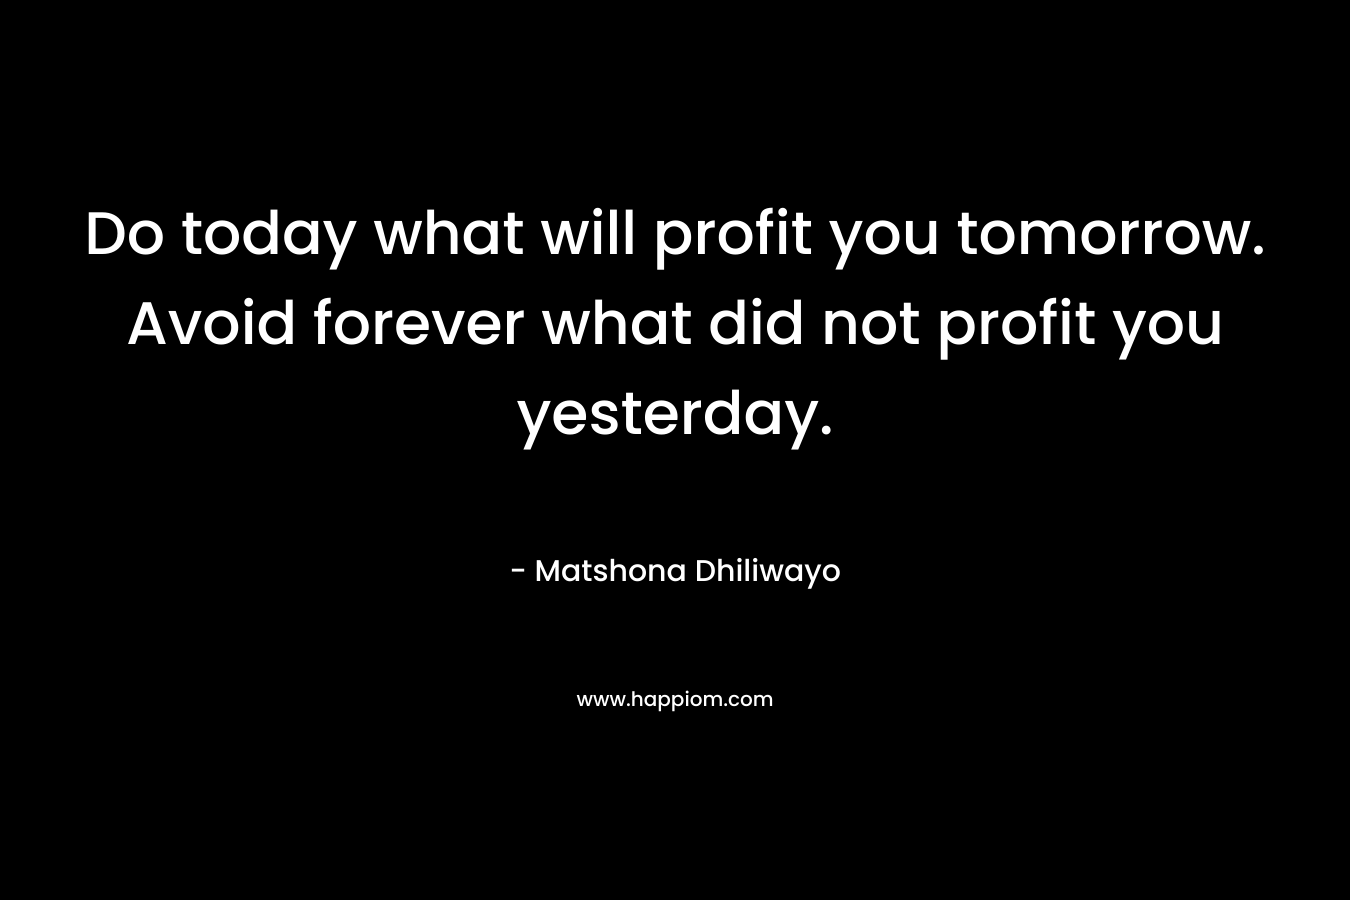 Do today what will profit you tomorrow. Avoid forever what did not profit you yesterday. – Matshona Dhiliwayo